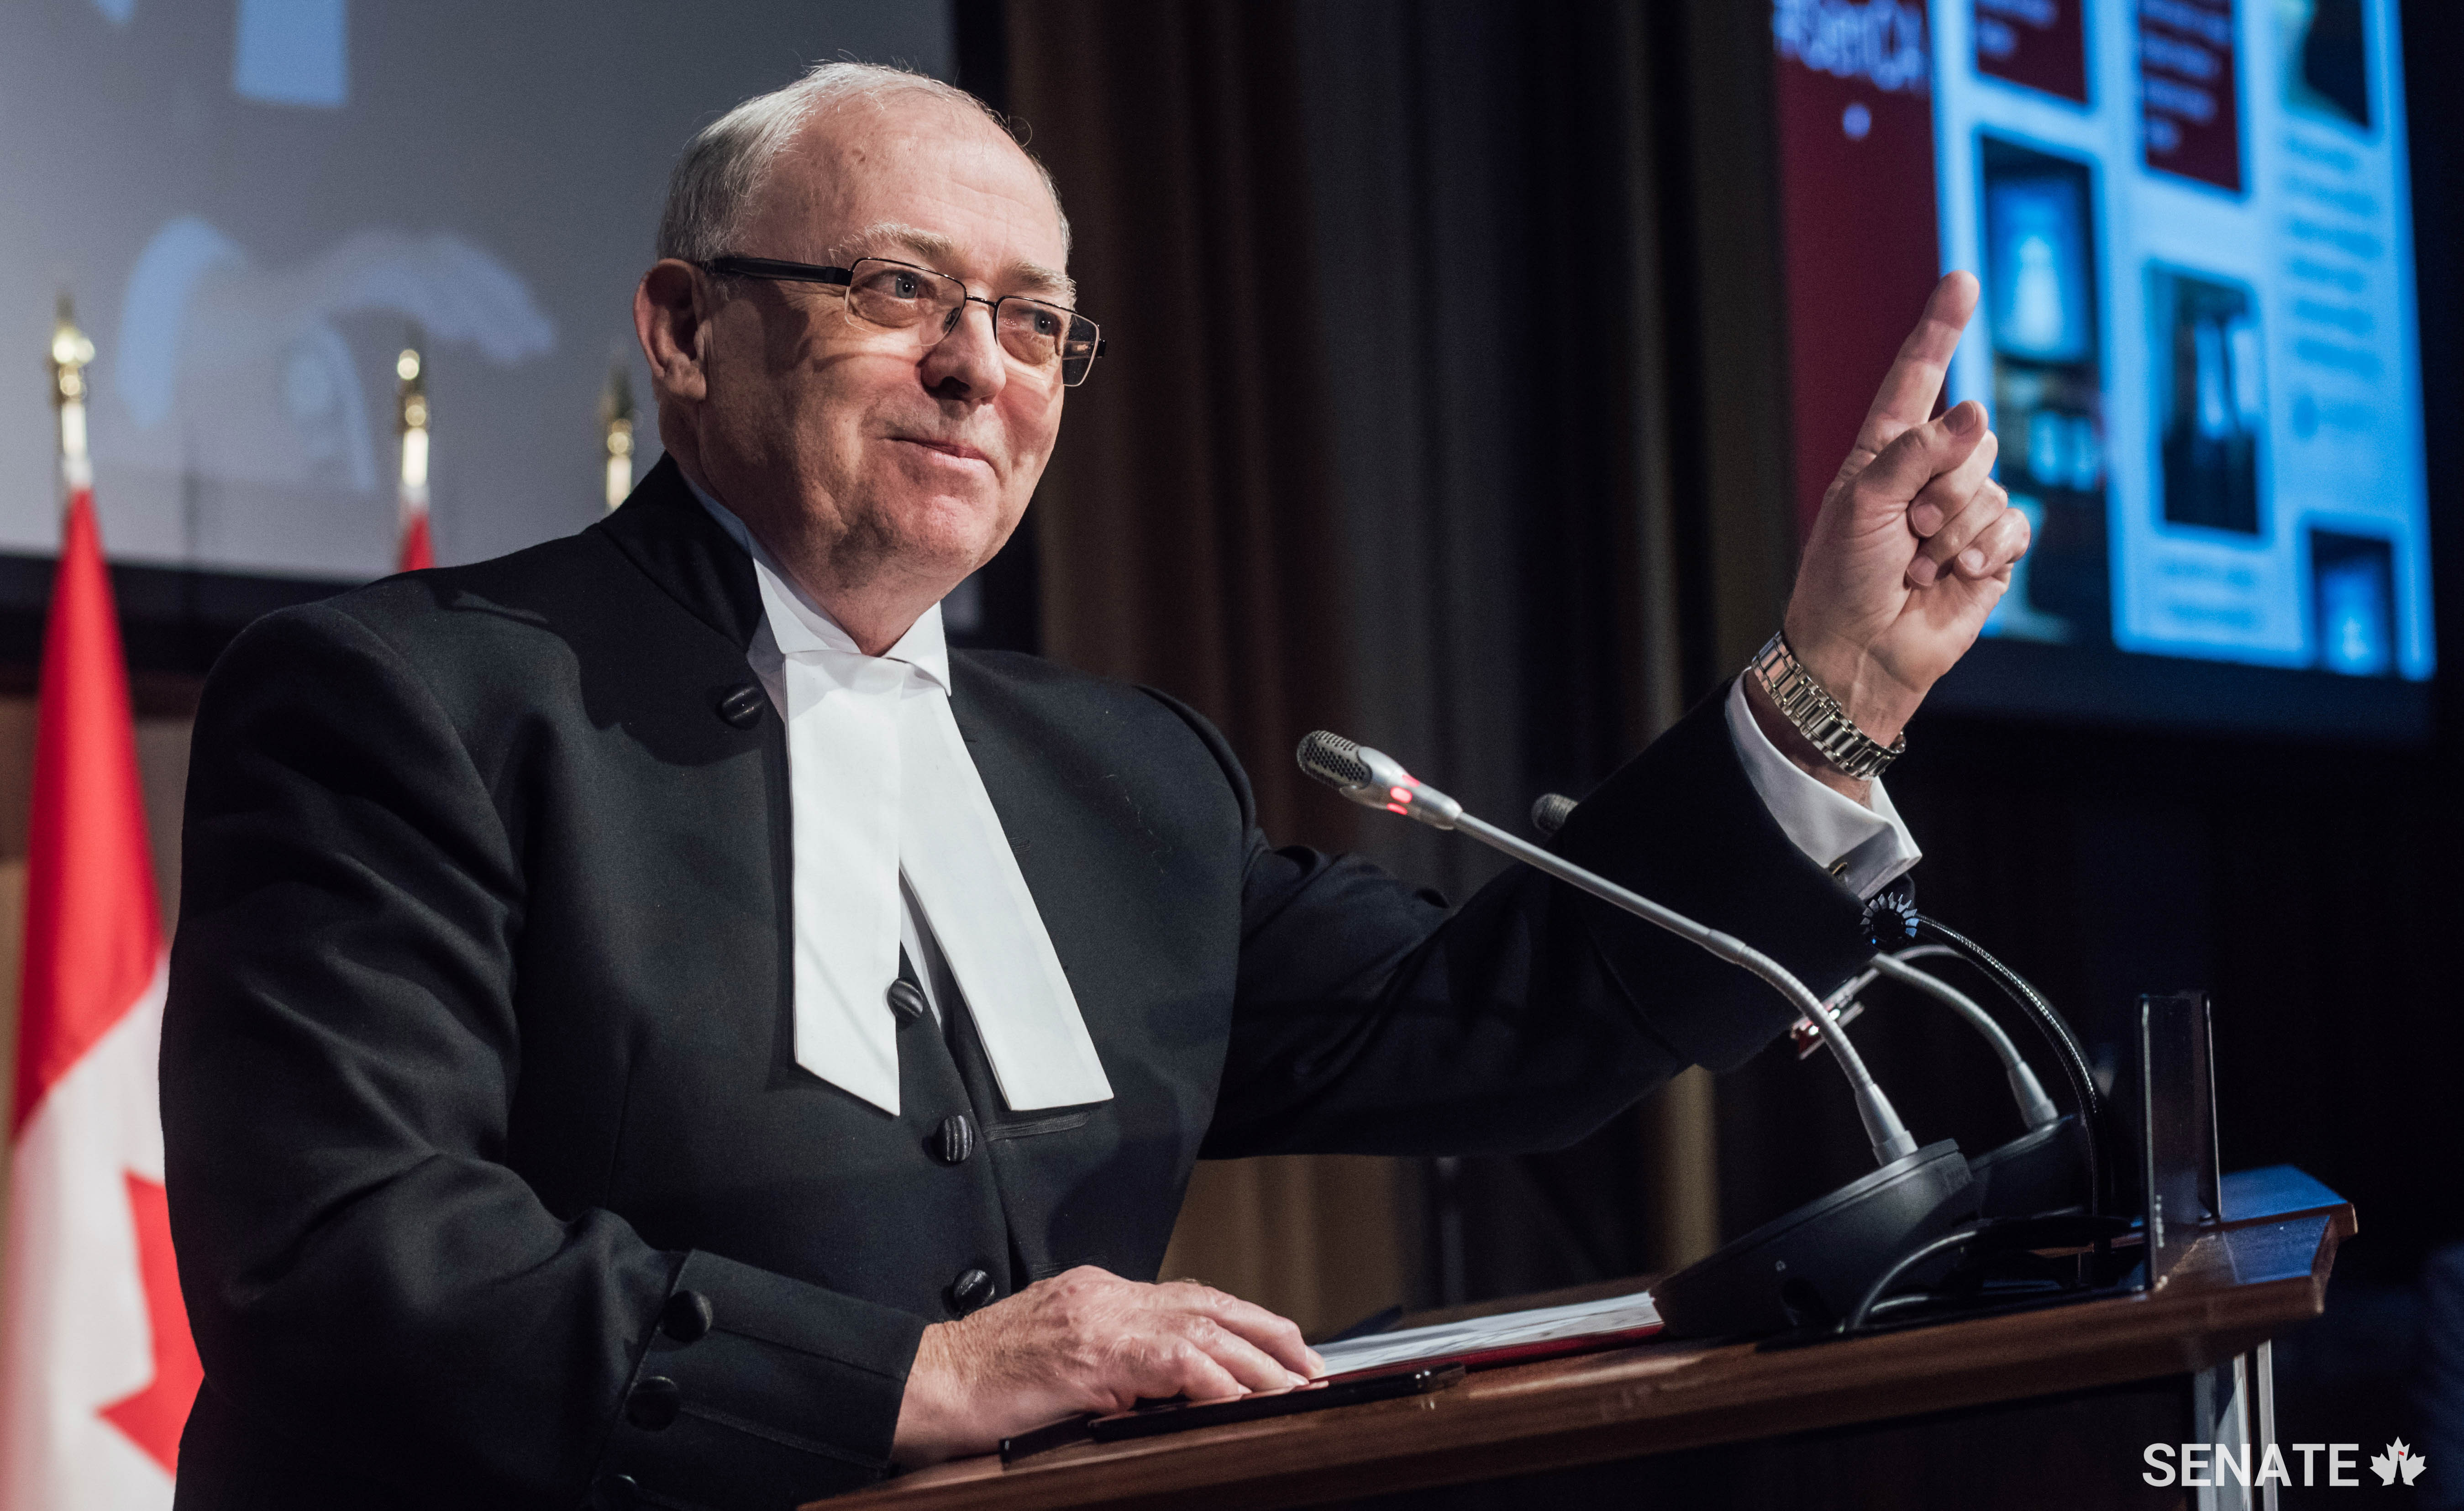 Senate Speaker George J. Furey tells the 500-strong audience that the Senate’s expanded digital presence marks a watershed. “As the new generation so eloquently puts it, ‘YOLO,’ which is why we are pursuing this project with so much vigour and energy.”